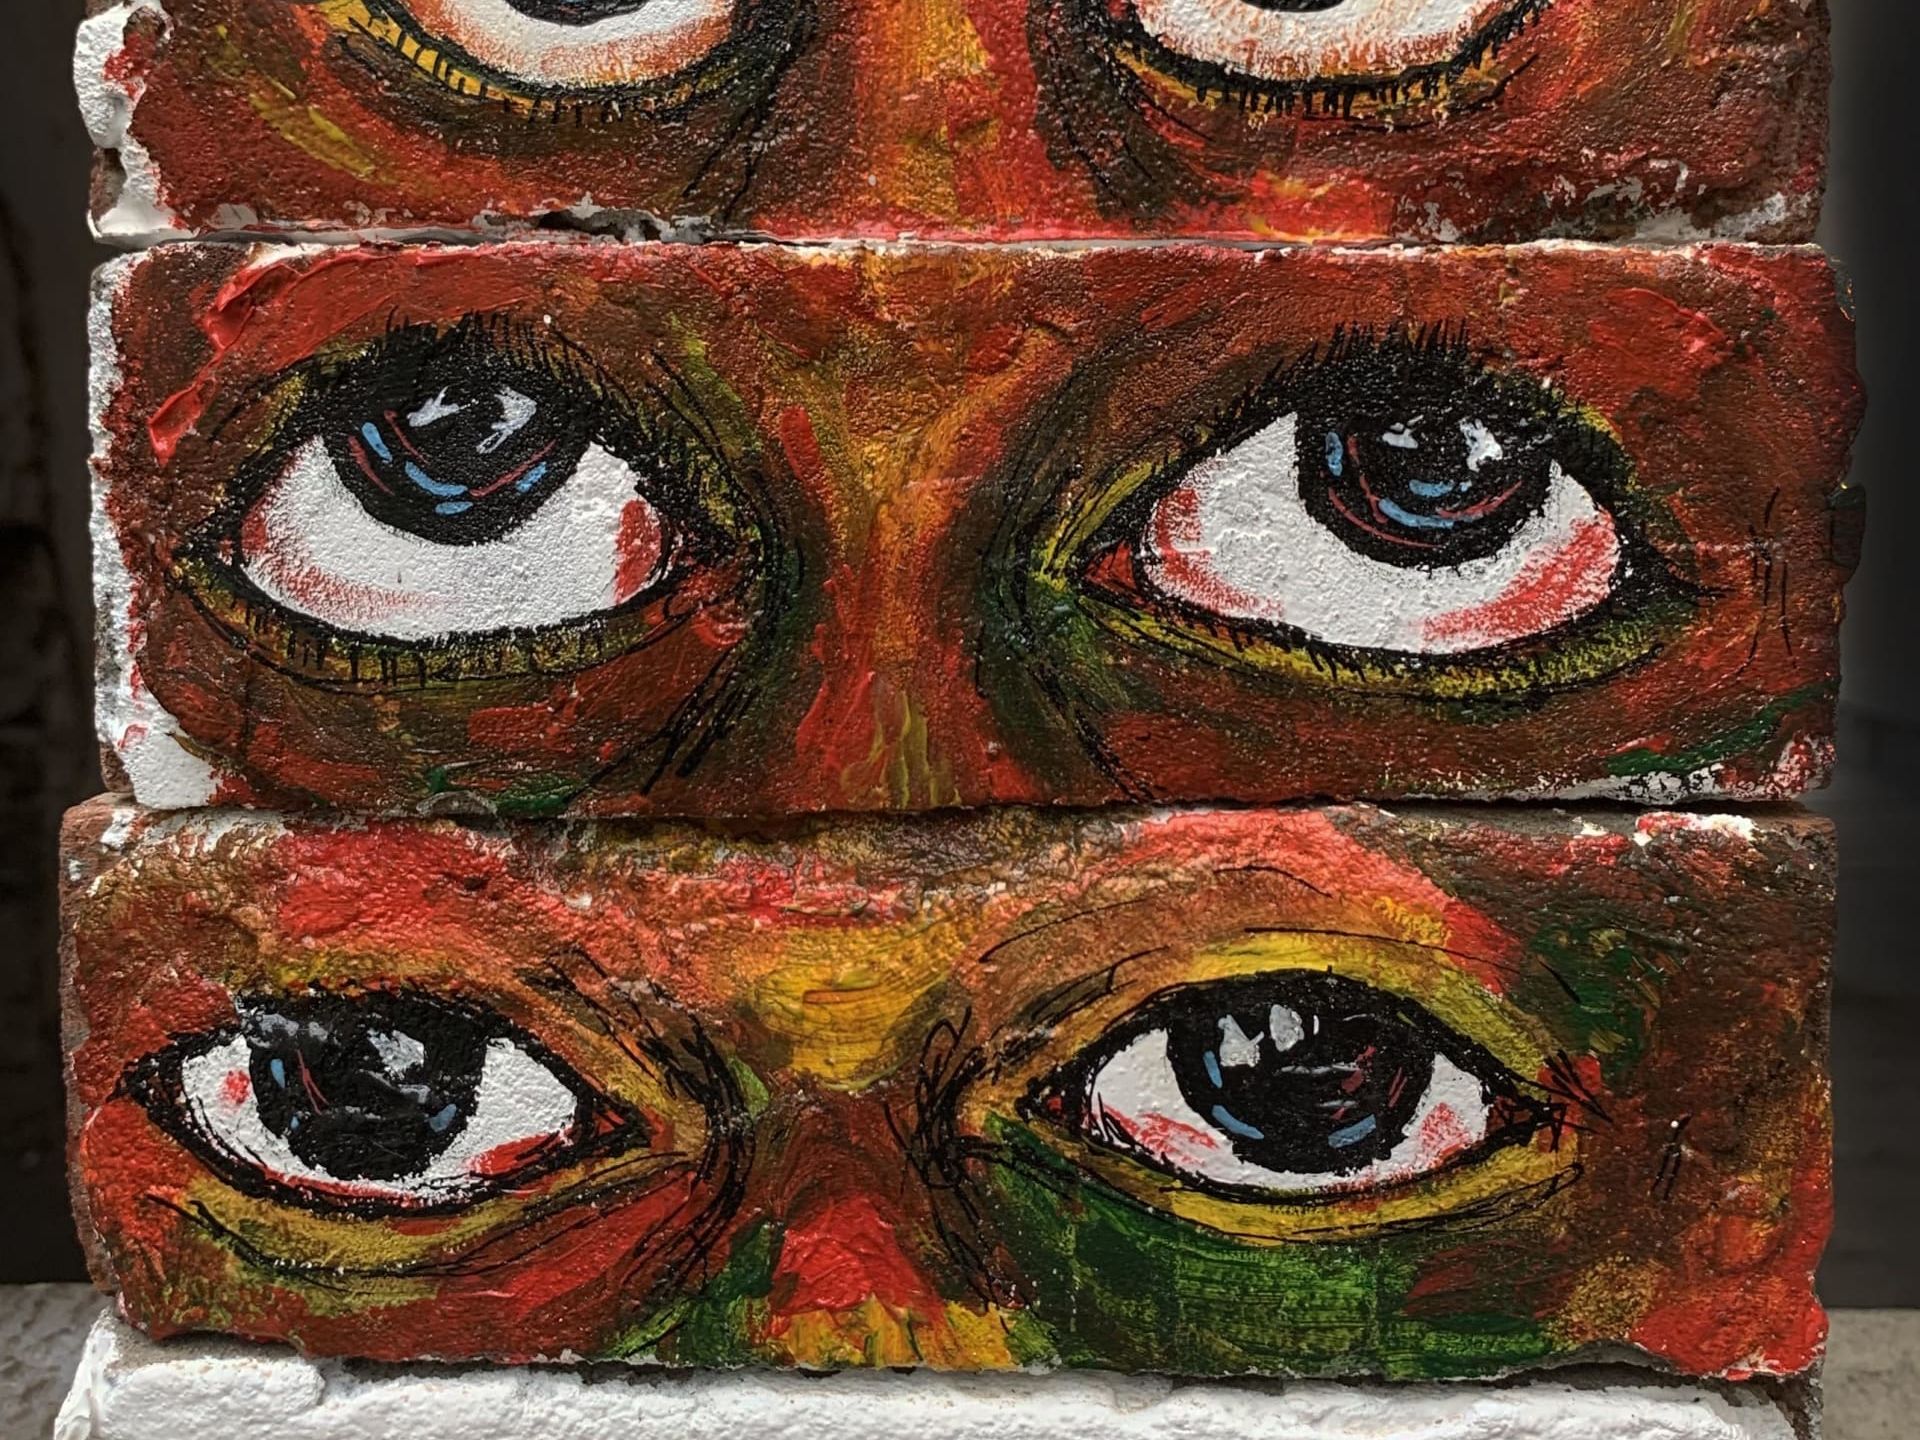 Large scale painting of 4 sets of eyes created using 4 horizontal rows of bricks stacked on top of each other, with intense colours 